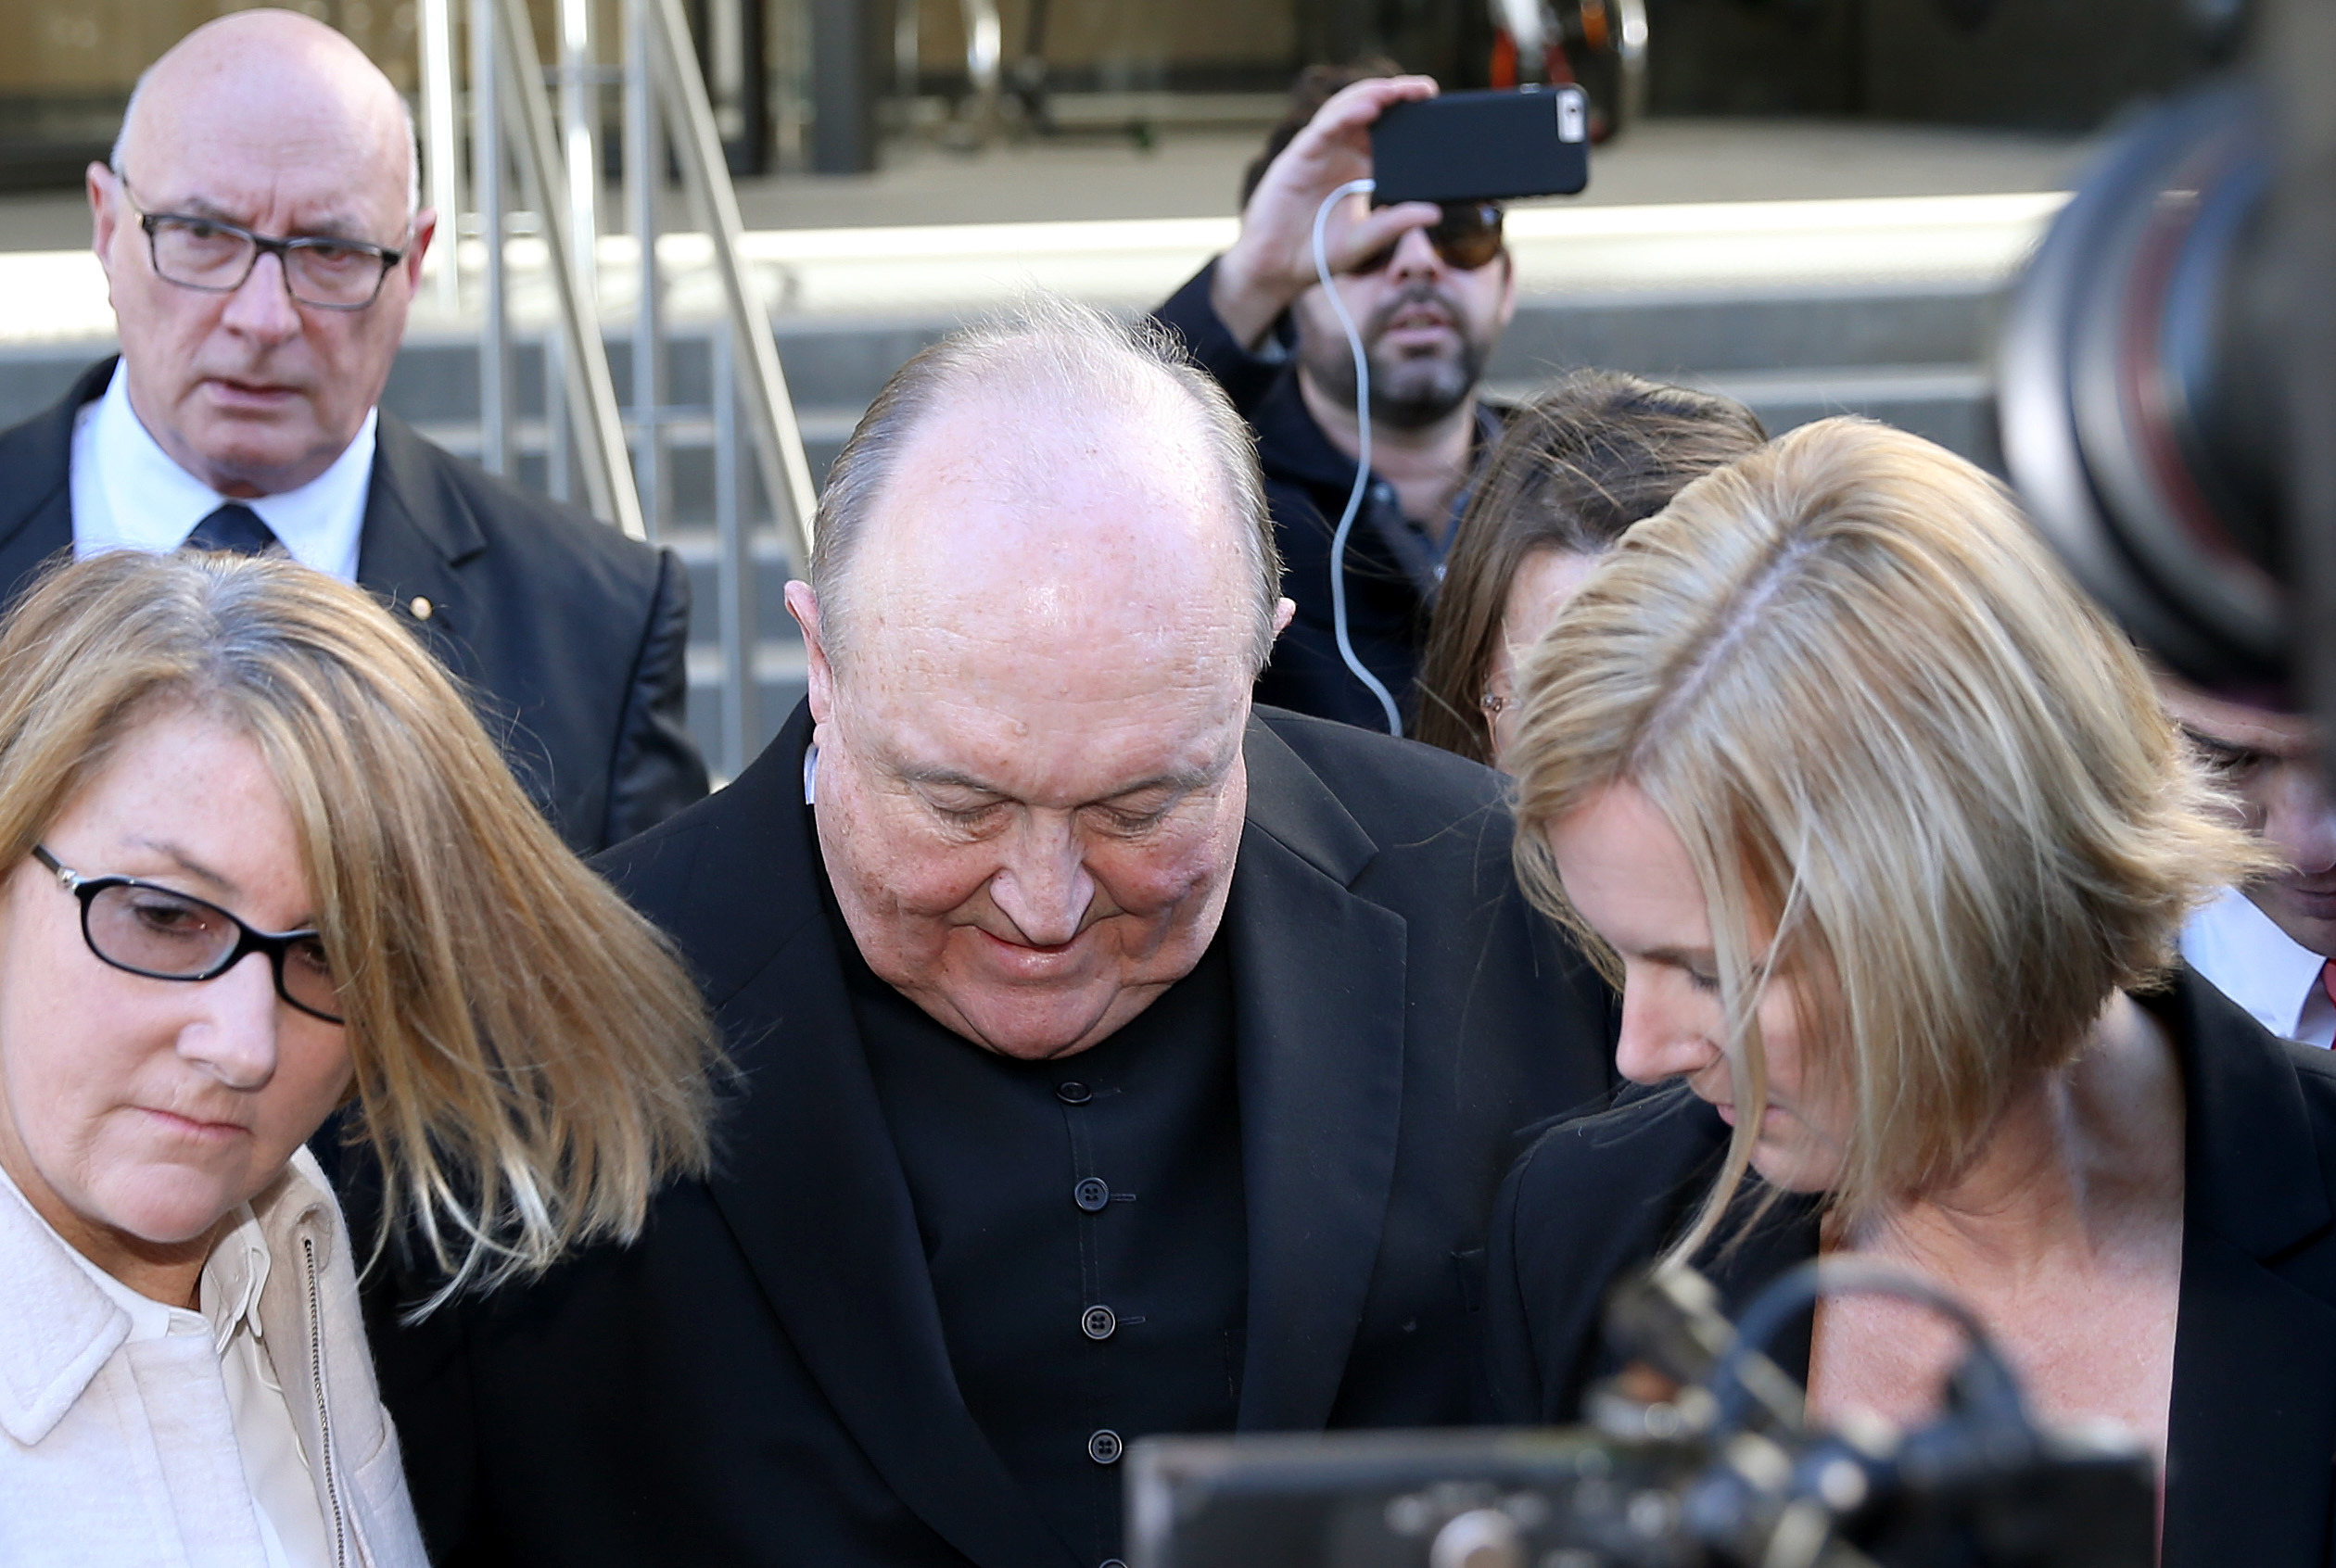 Archbishop found guilty of concealing child abuse